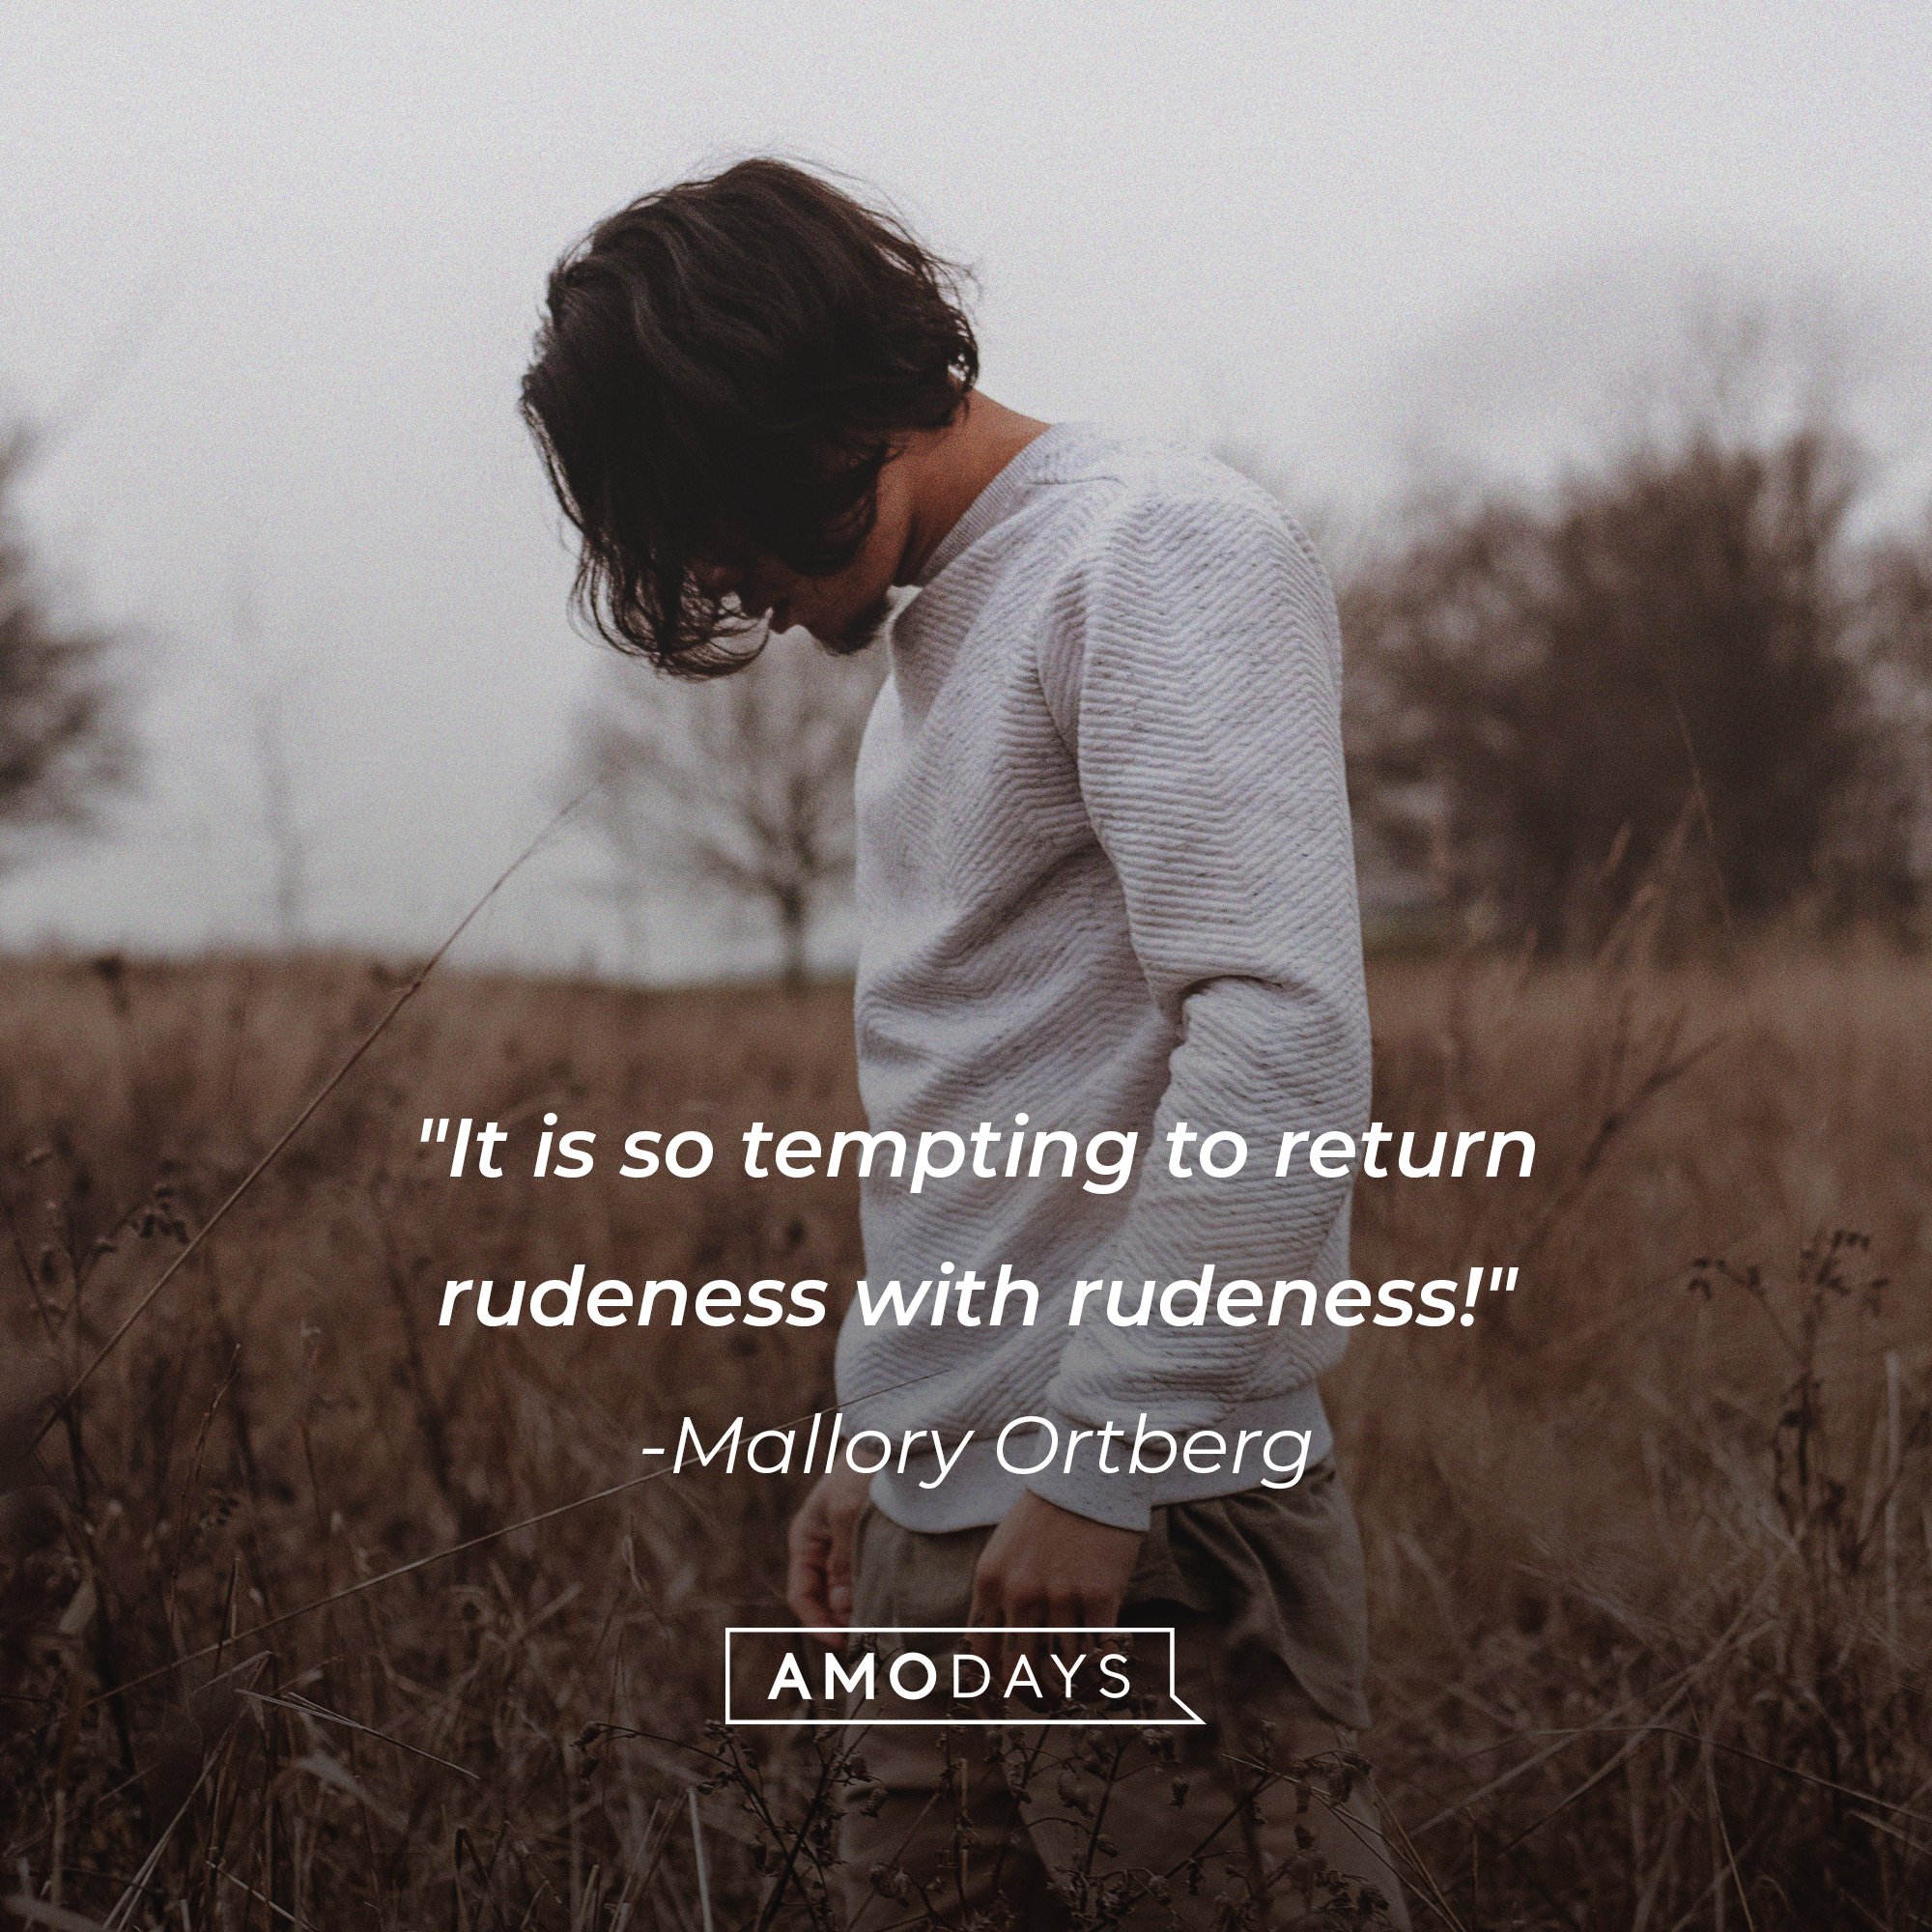  Mallory Ortberg’s quote: "It is so tempting to return rudeness with rudeness!" | Image: AmoDays